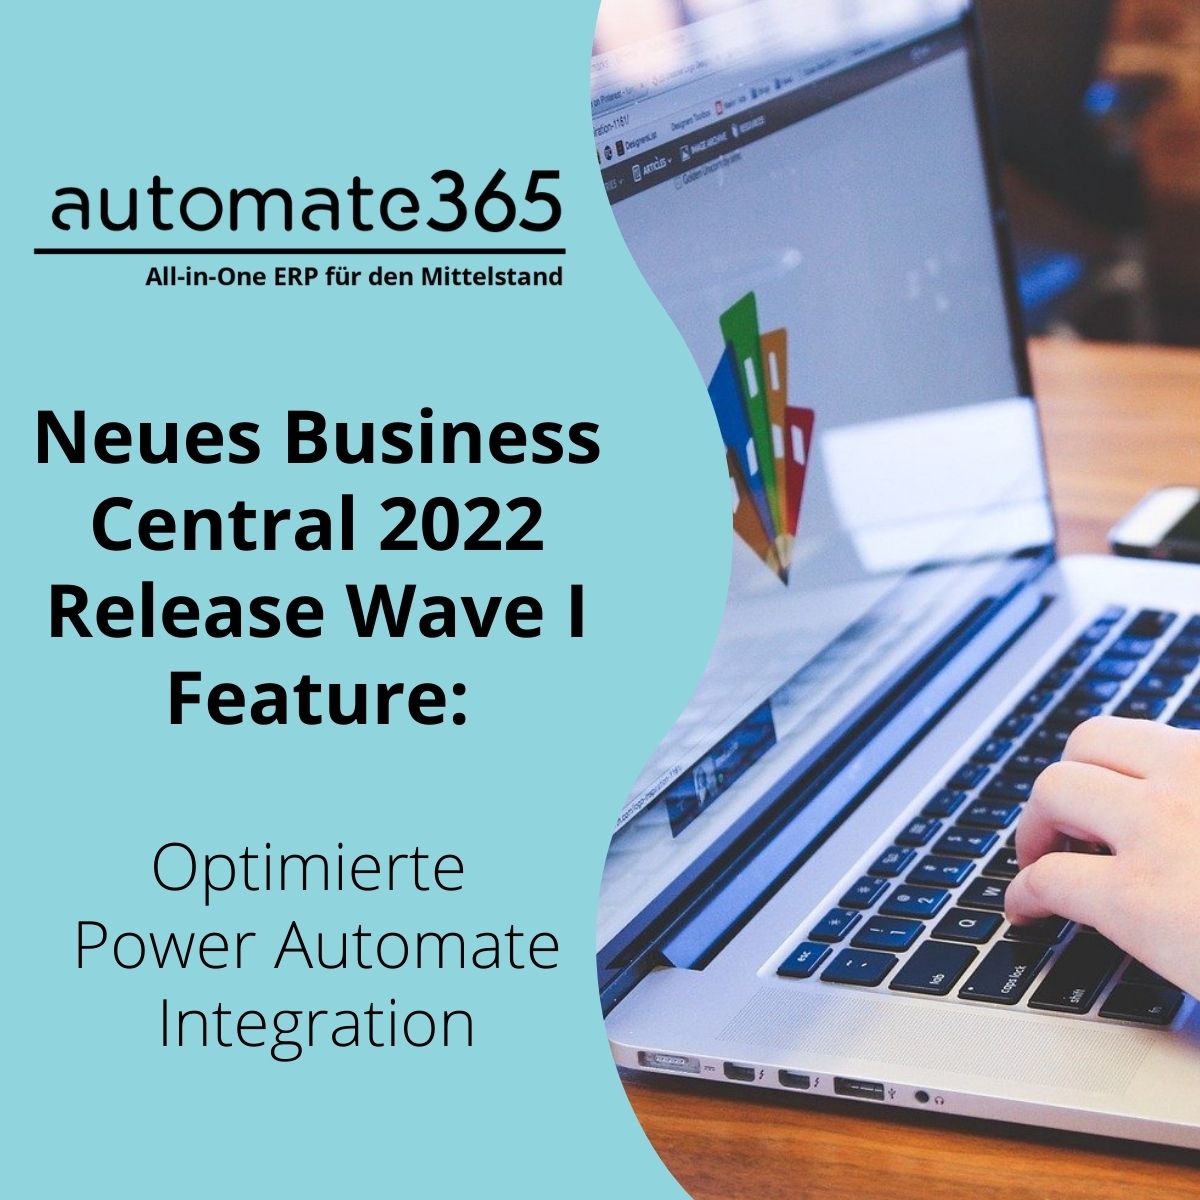 Neues BC Release Wave I 2022 Feature: Power Automate Integration